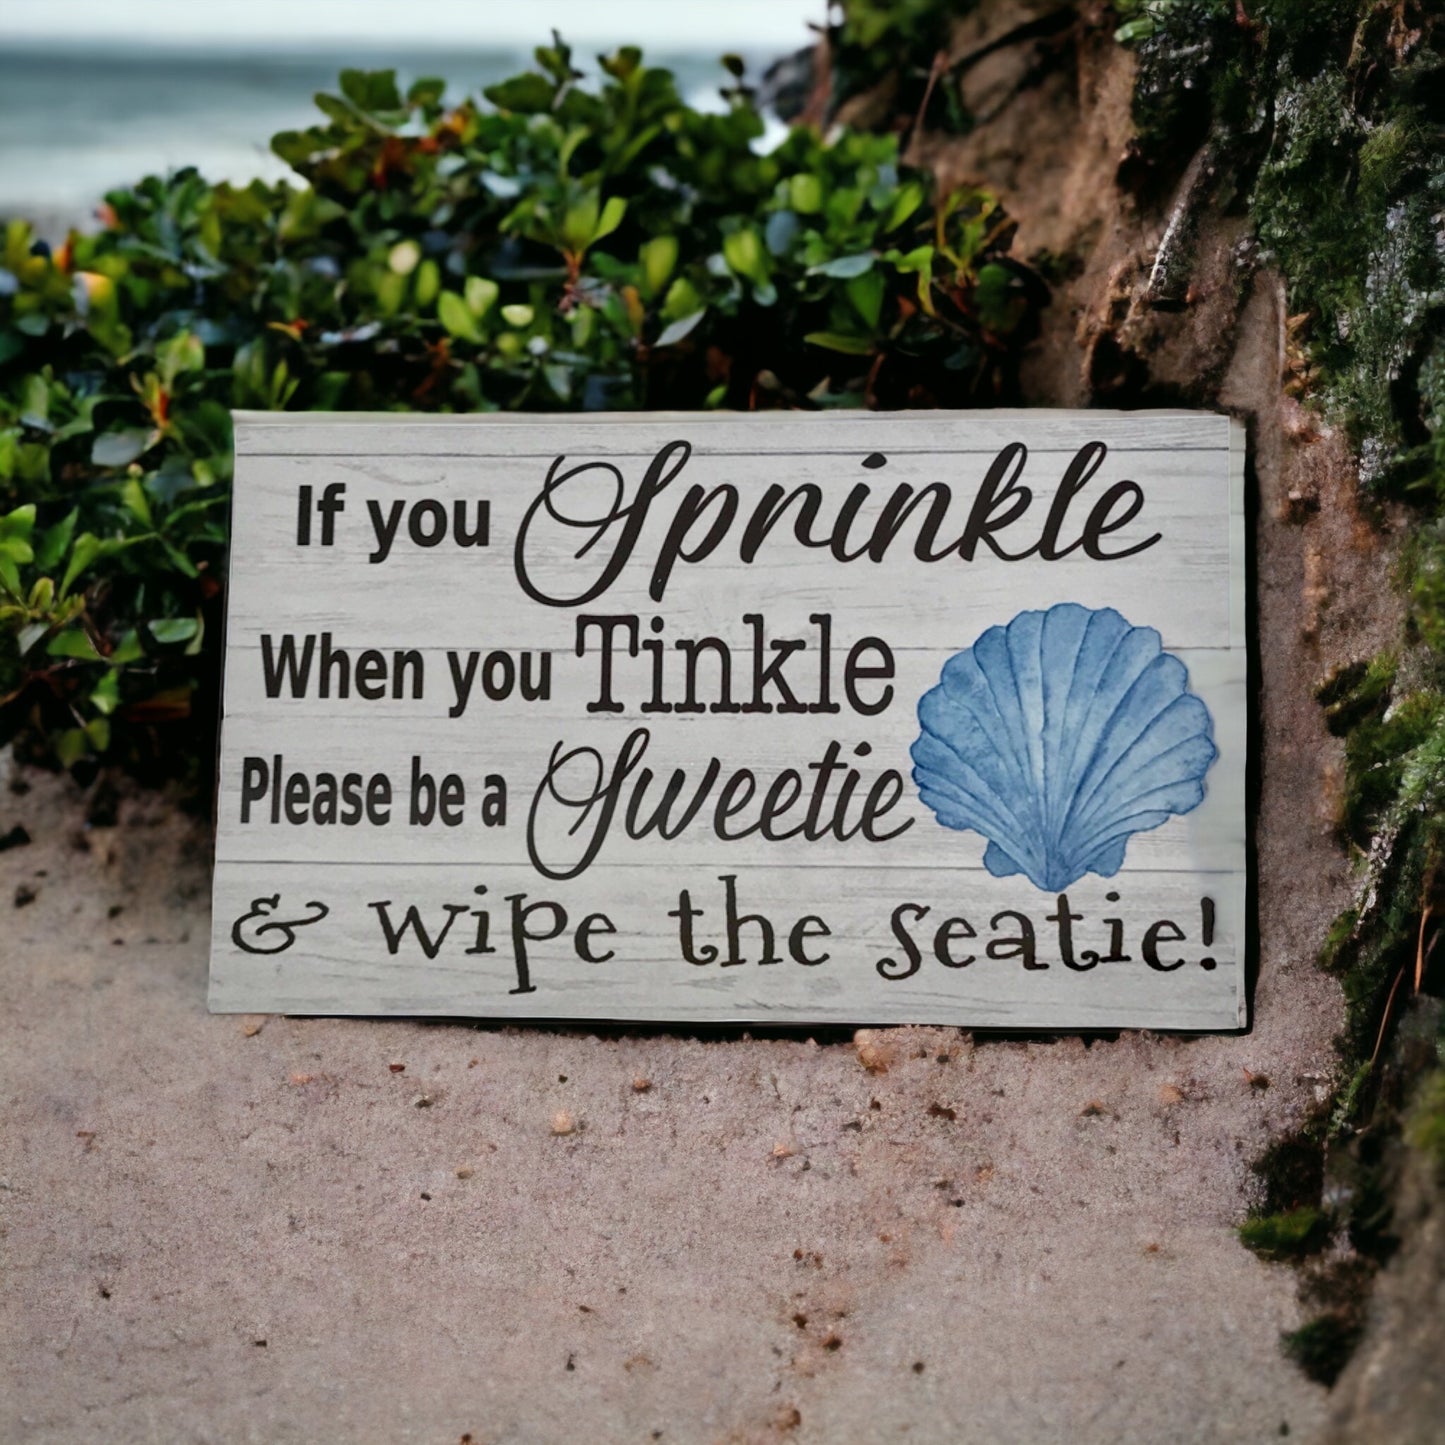 Toilet Sprinkle Tinkle Sweet Shell Beach Sign - The Renmy Store Homewares & Gifts 